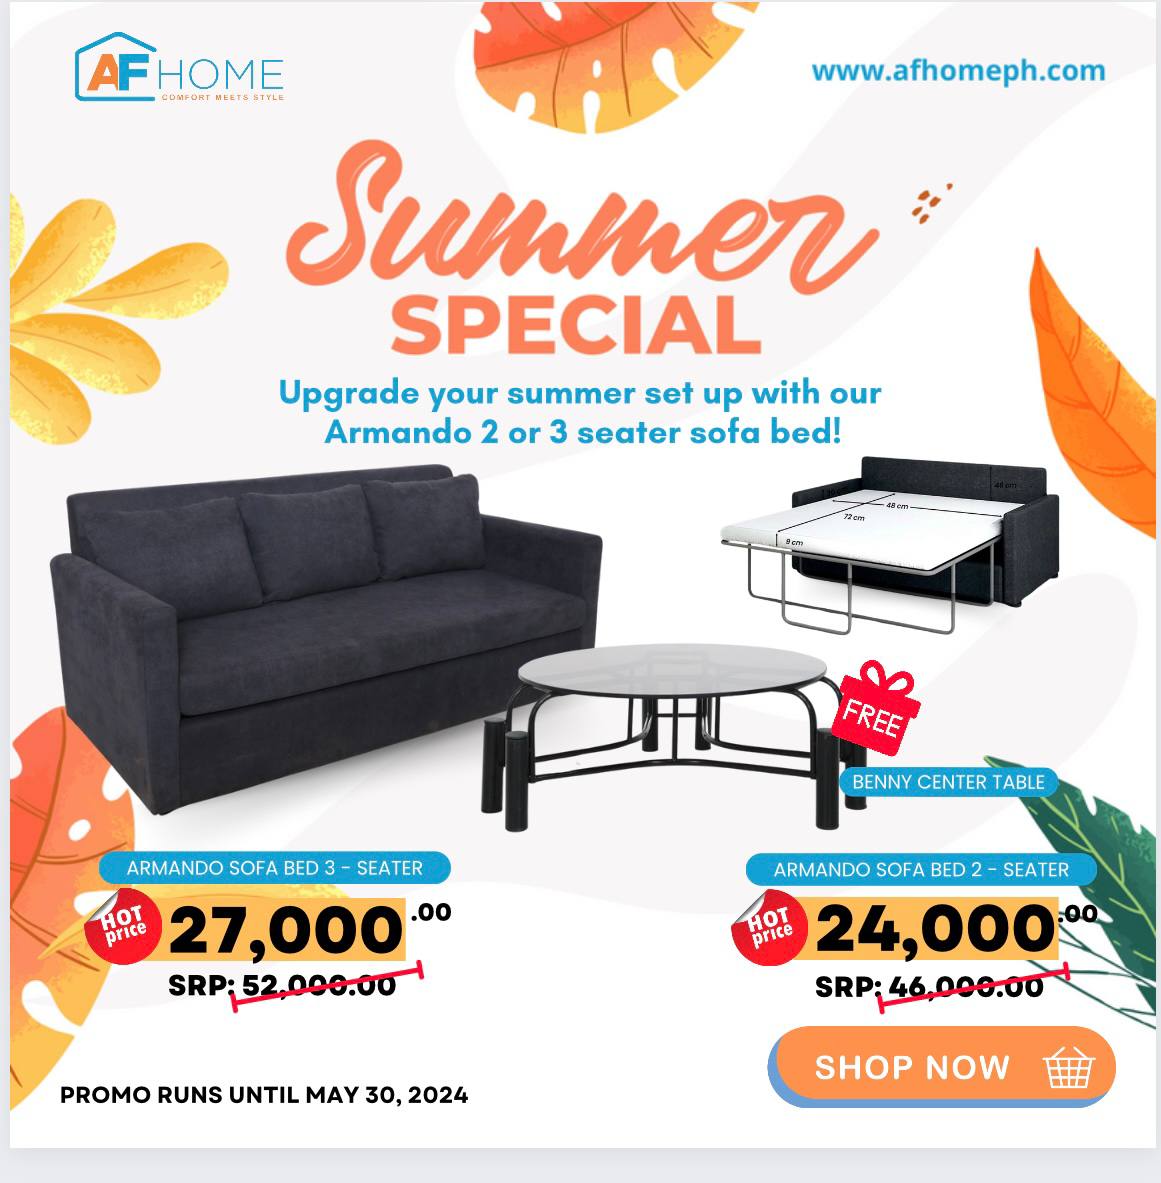 Armando 2 or 3 Seater Sofa Bed | Summer Special Promo AF Home